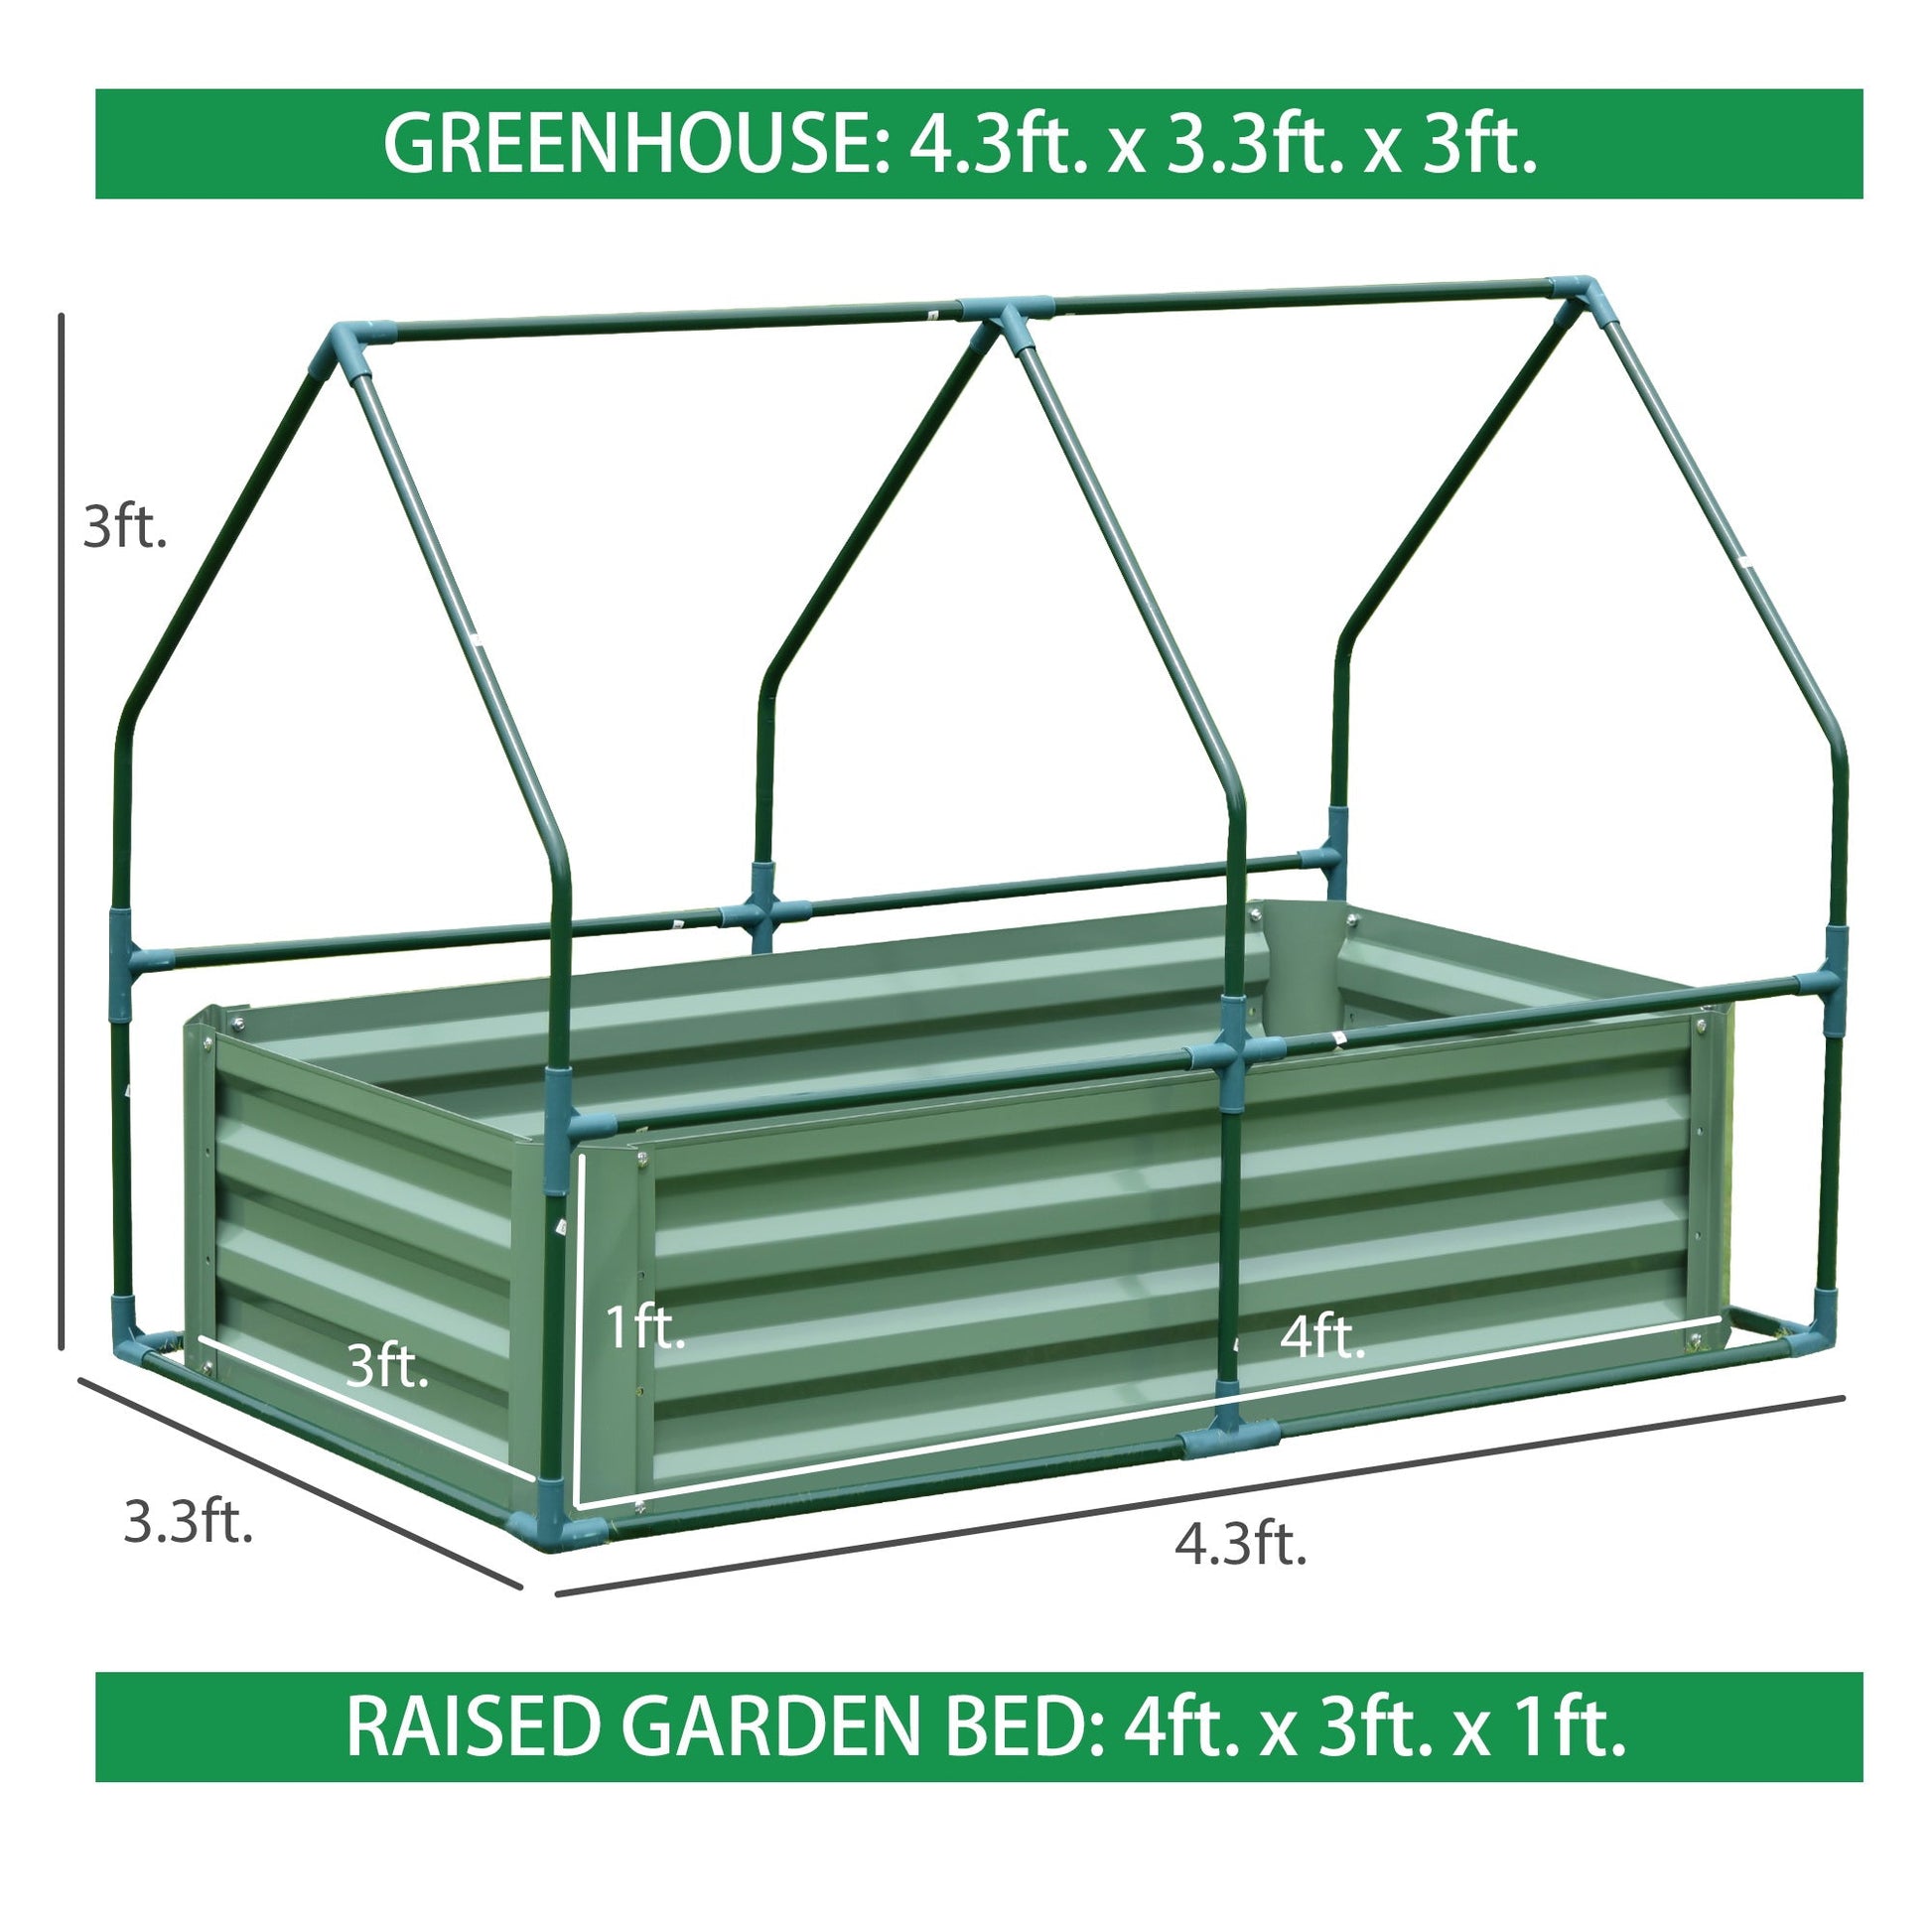 Greenhouse With Raised Garden Beds - Aoodor